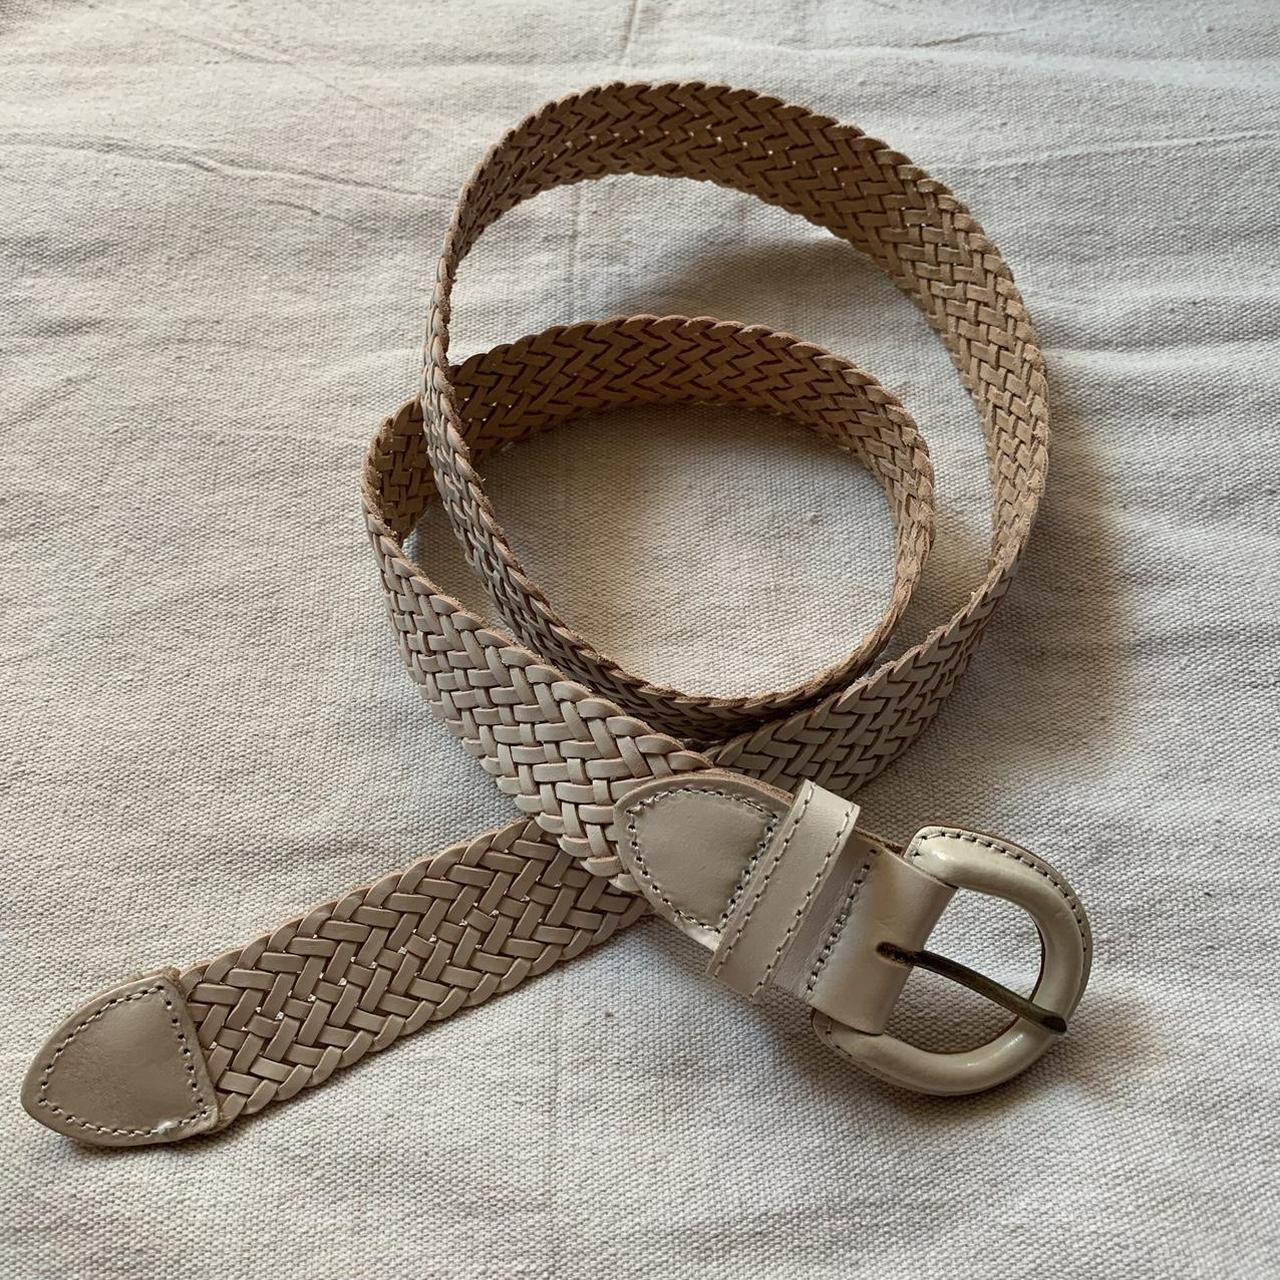 Madewell Covered Buckle Belt